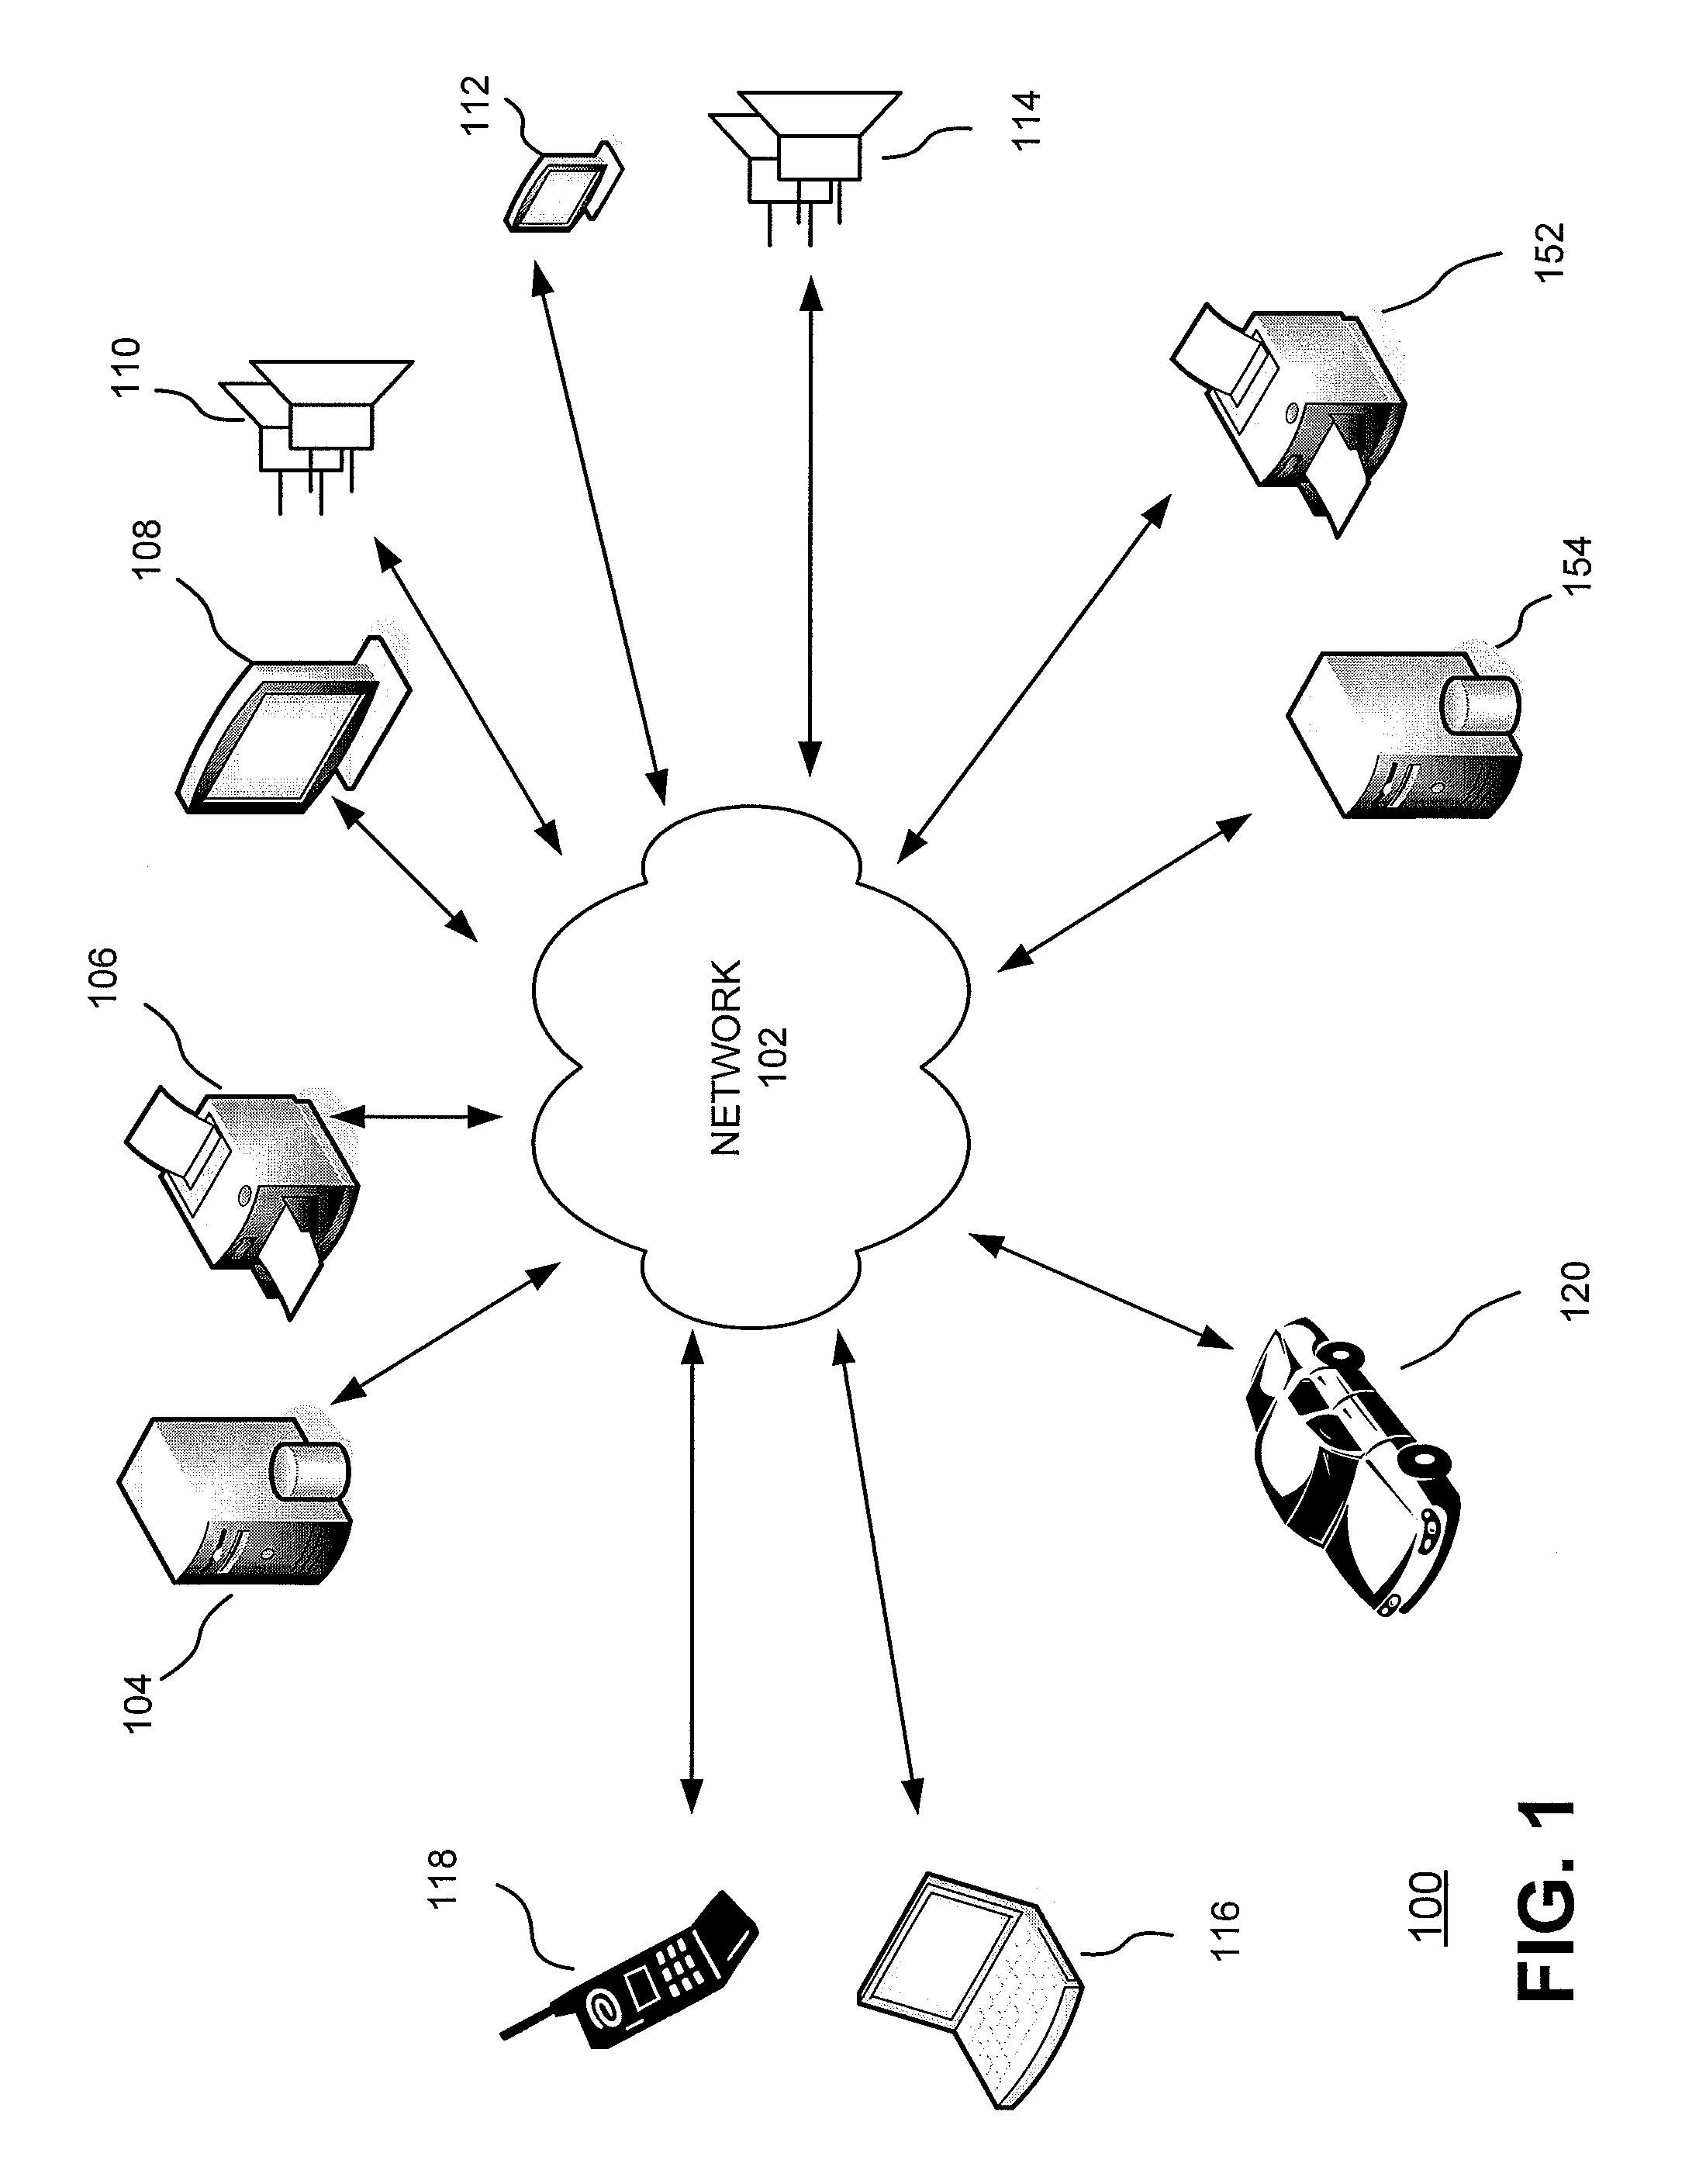 Providing services to a mobile device in a personal network